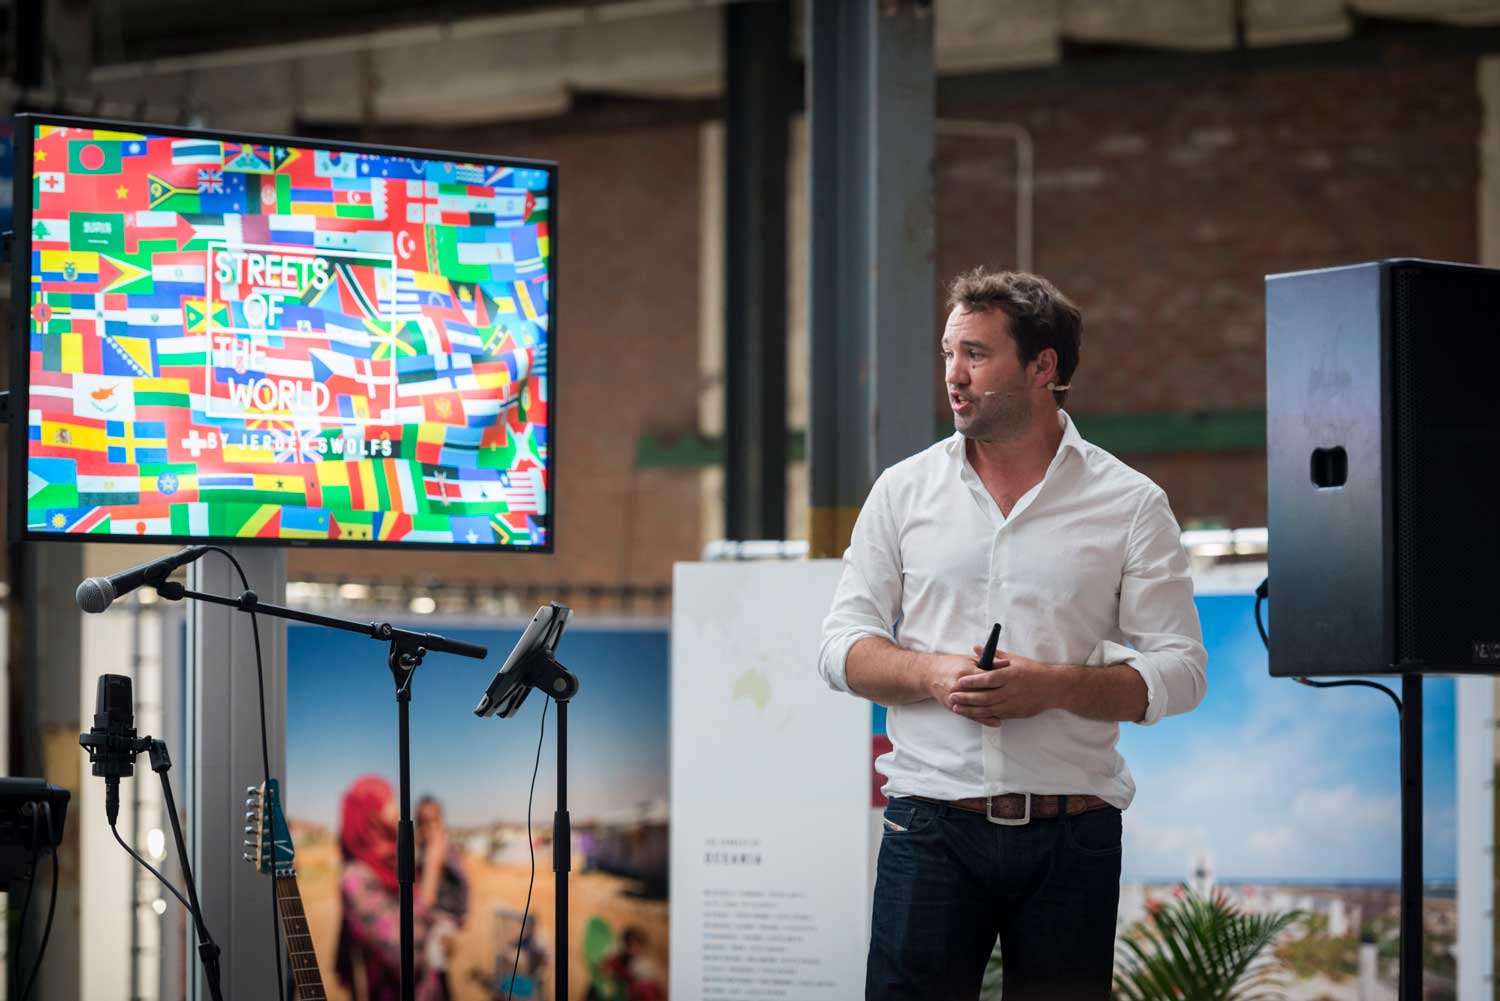 Jeroen Swolfs giving a presentation during B2B event at streets of the world photo museum